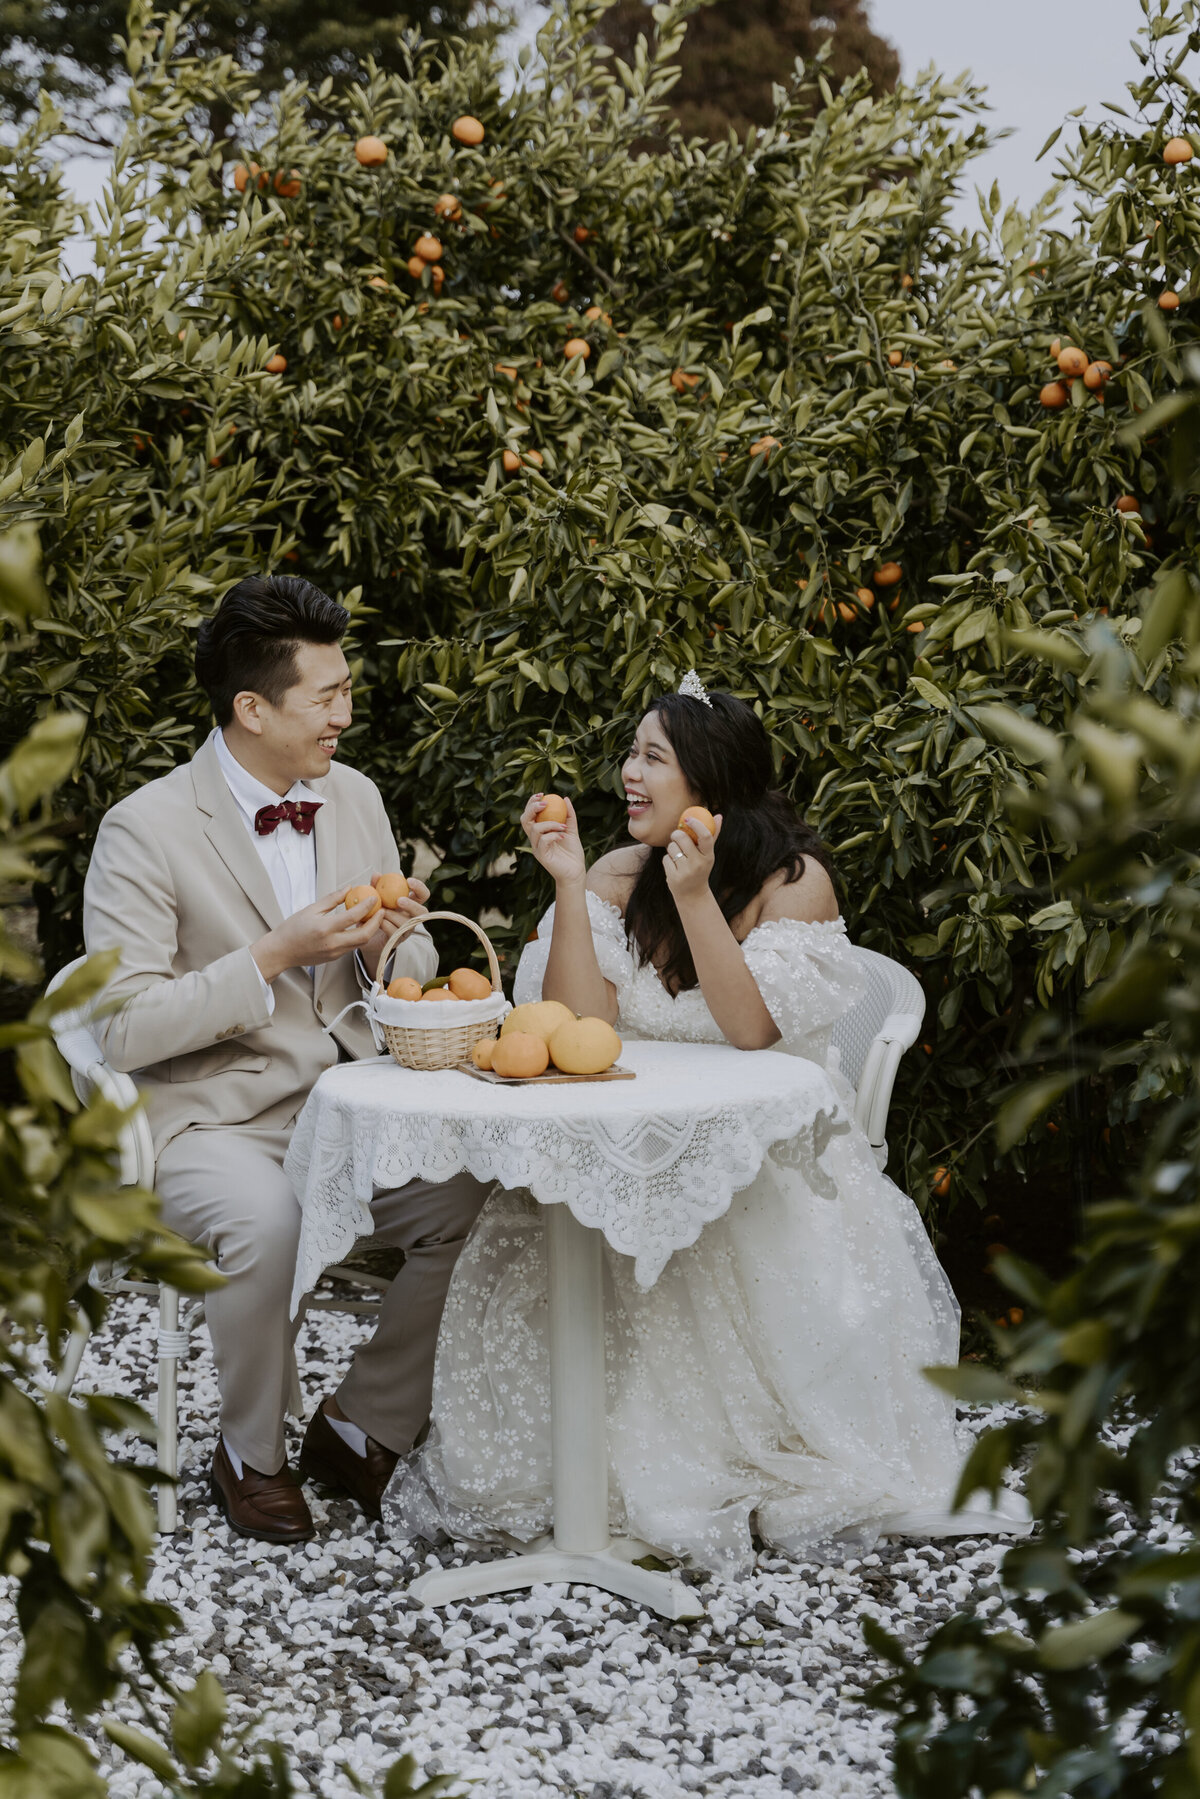 the couple laughing while sitting in a table surrounded by tangerines